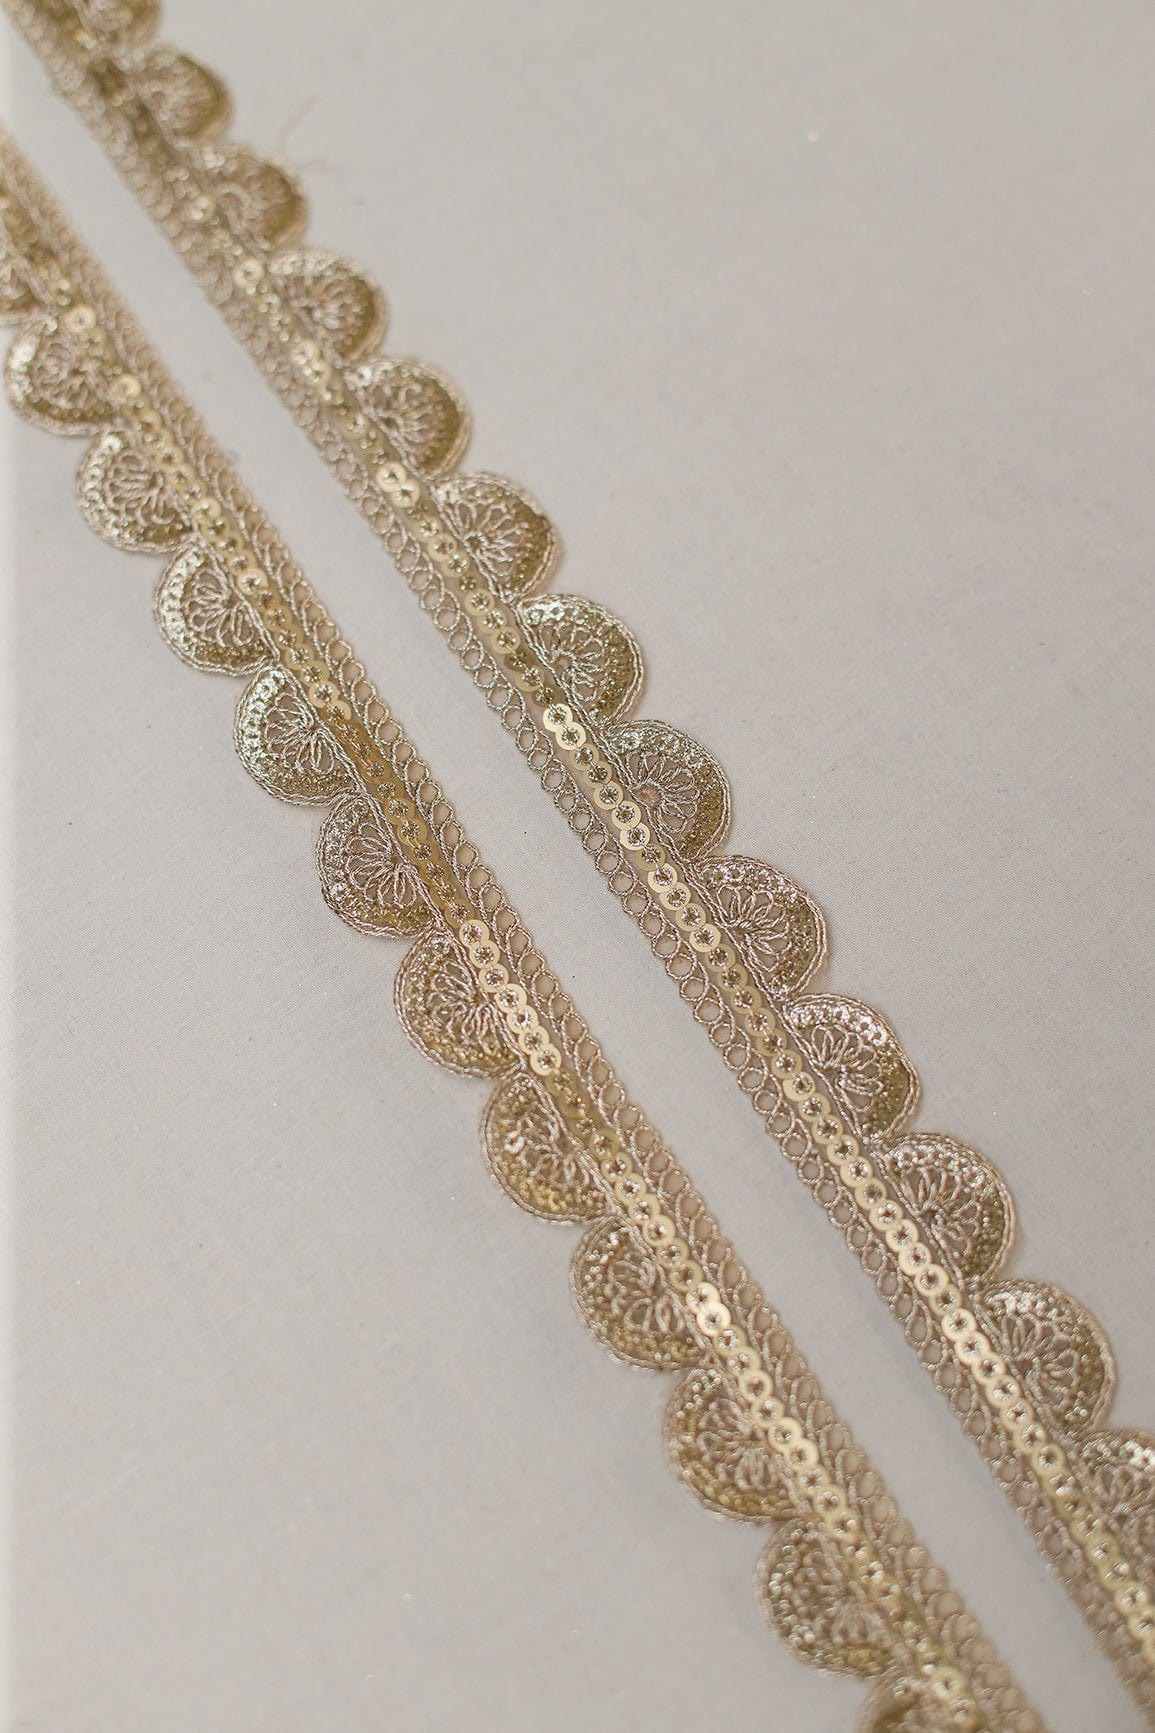 doeraa Laces Gold Zari With Sequins Embroidered Scallop Lace (9 Meters)